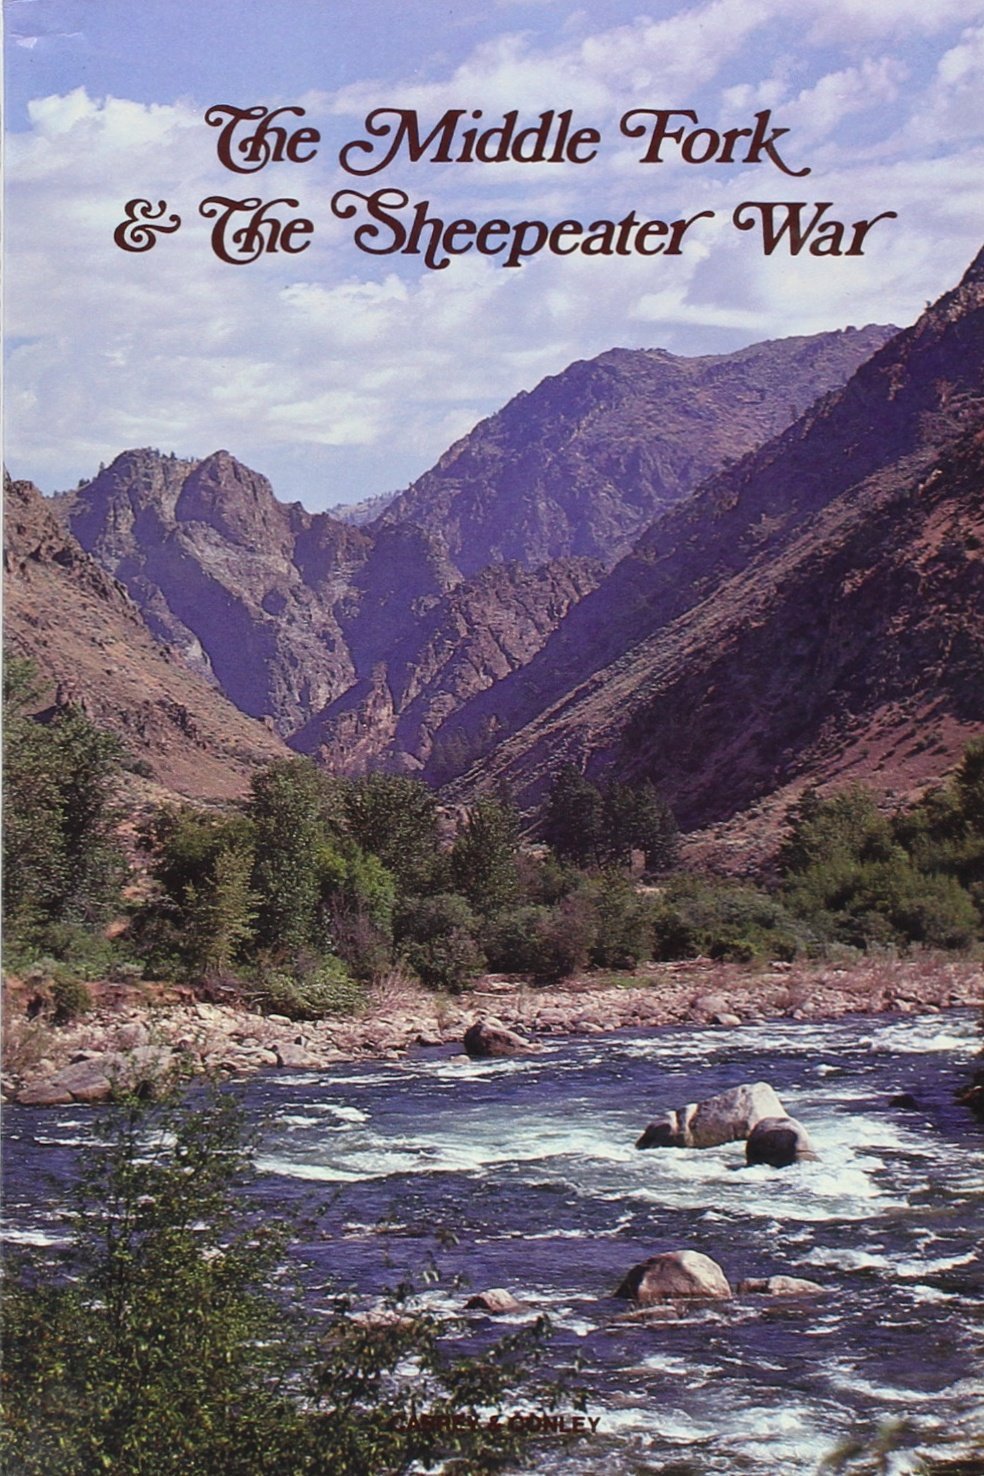 The Middle Fork & the Sheepeater War (book cover)